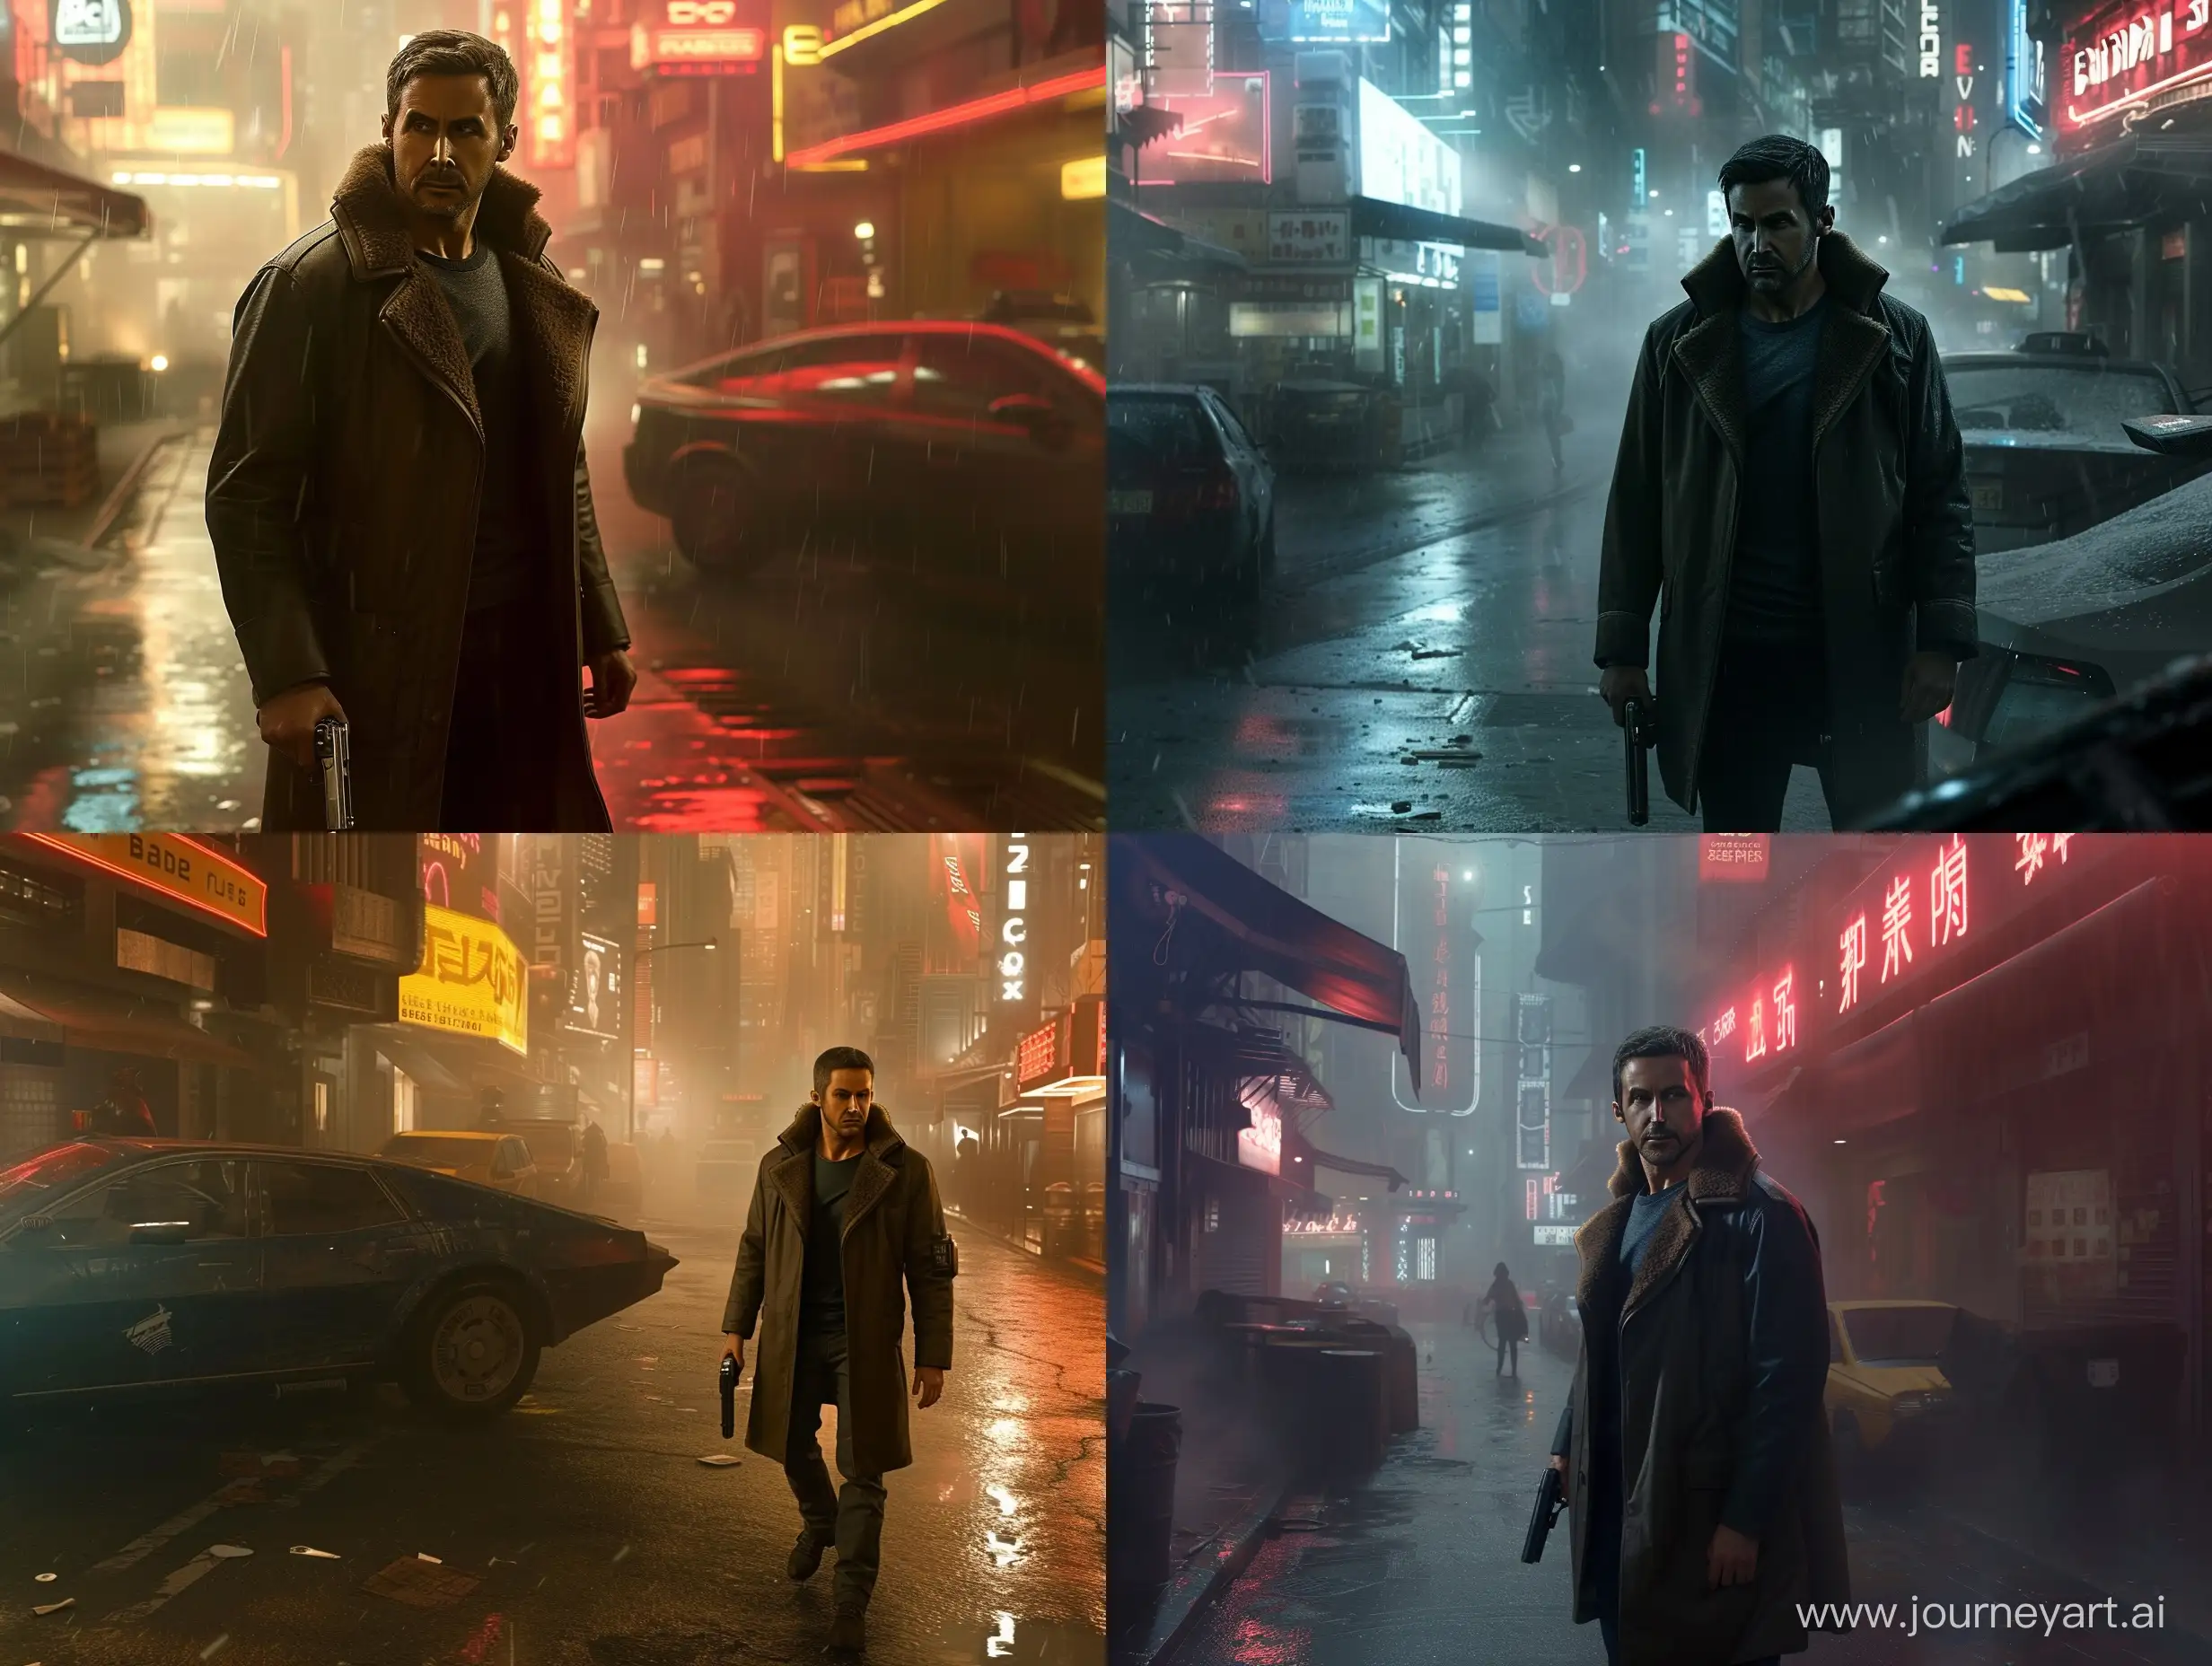 "Blade Runner 2049" is a third-person video game set in a futuristic urban environment with advanced ray tracing visuals. Developed specifically for the PS5 system, this version of the game features Ryan Gosling as the protagonist standing on a street, armed with a pistol, and an expansive open-world environment powered by the Unreal Engine, all set in the nighttime.

